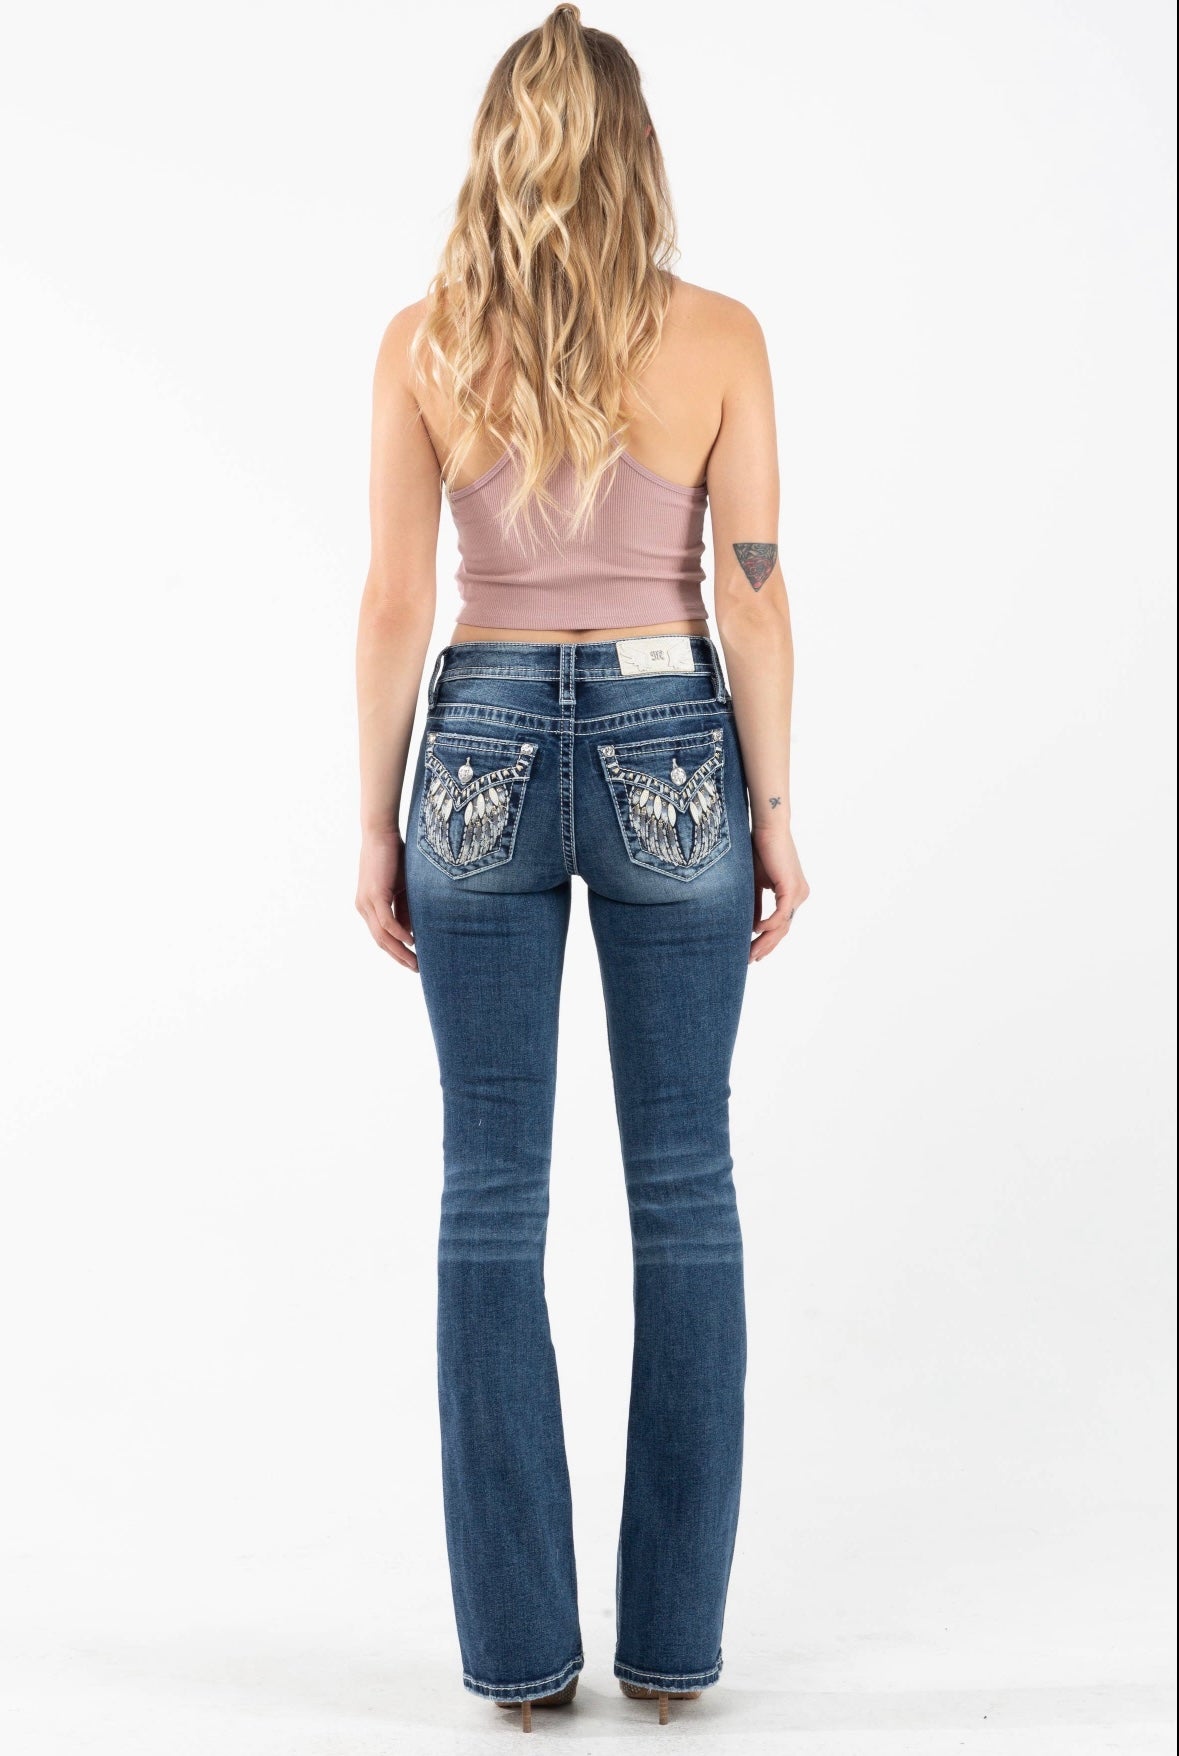 Miss Me mid-rise boot cut jeans – All About You Boutique